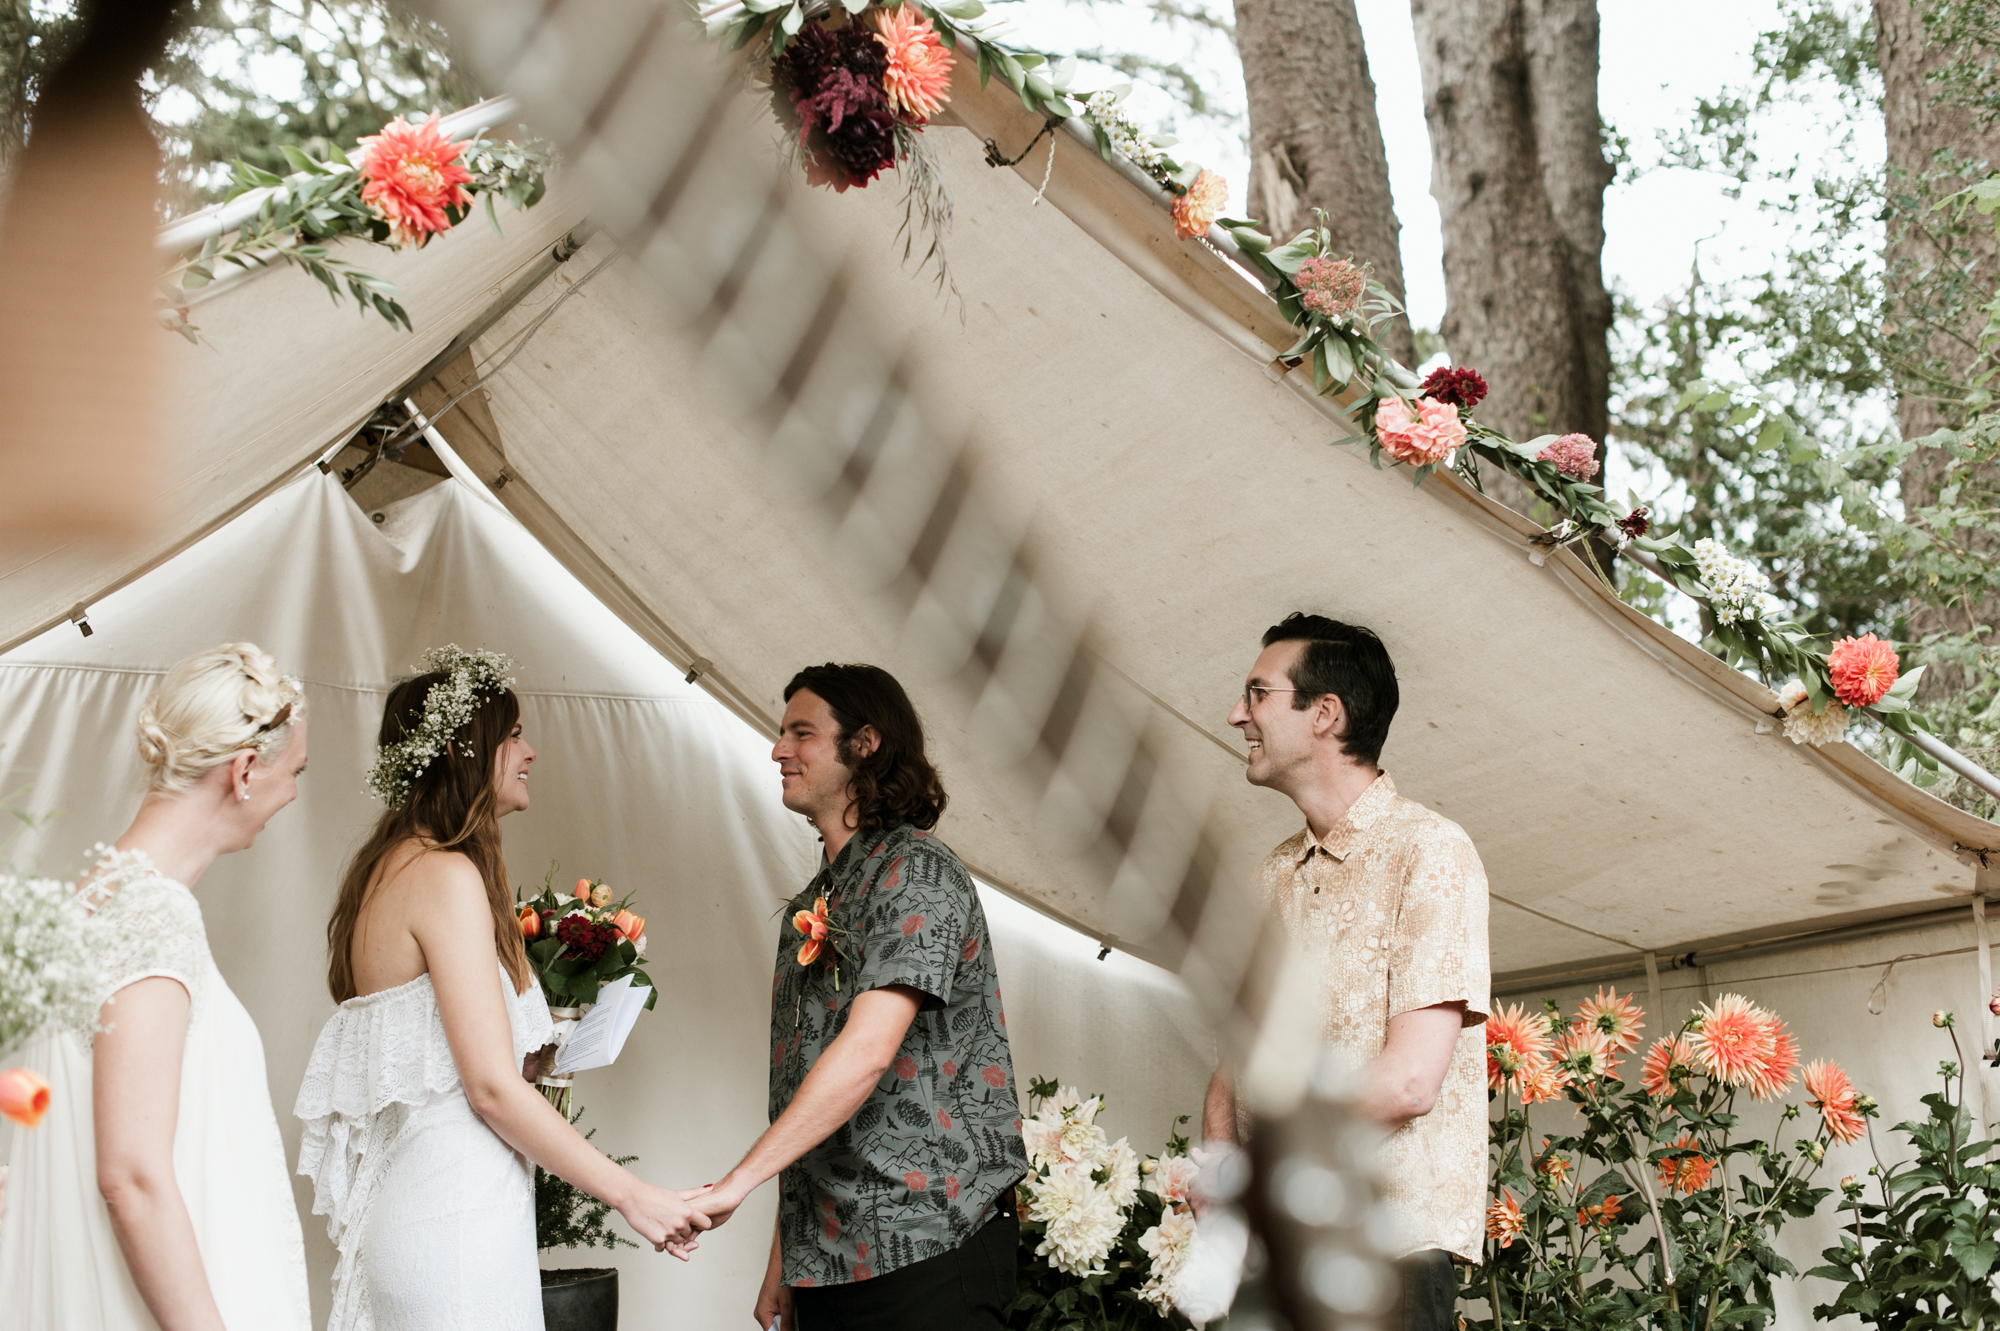 The bride and groom say their vows under a white tent decorated with flowers. By Long Beach, Washington wedding photographer Briana Morrison